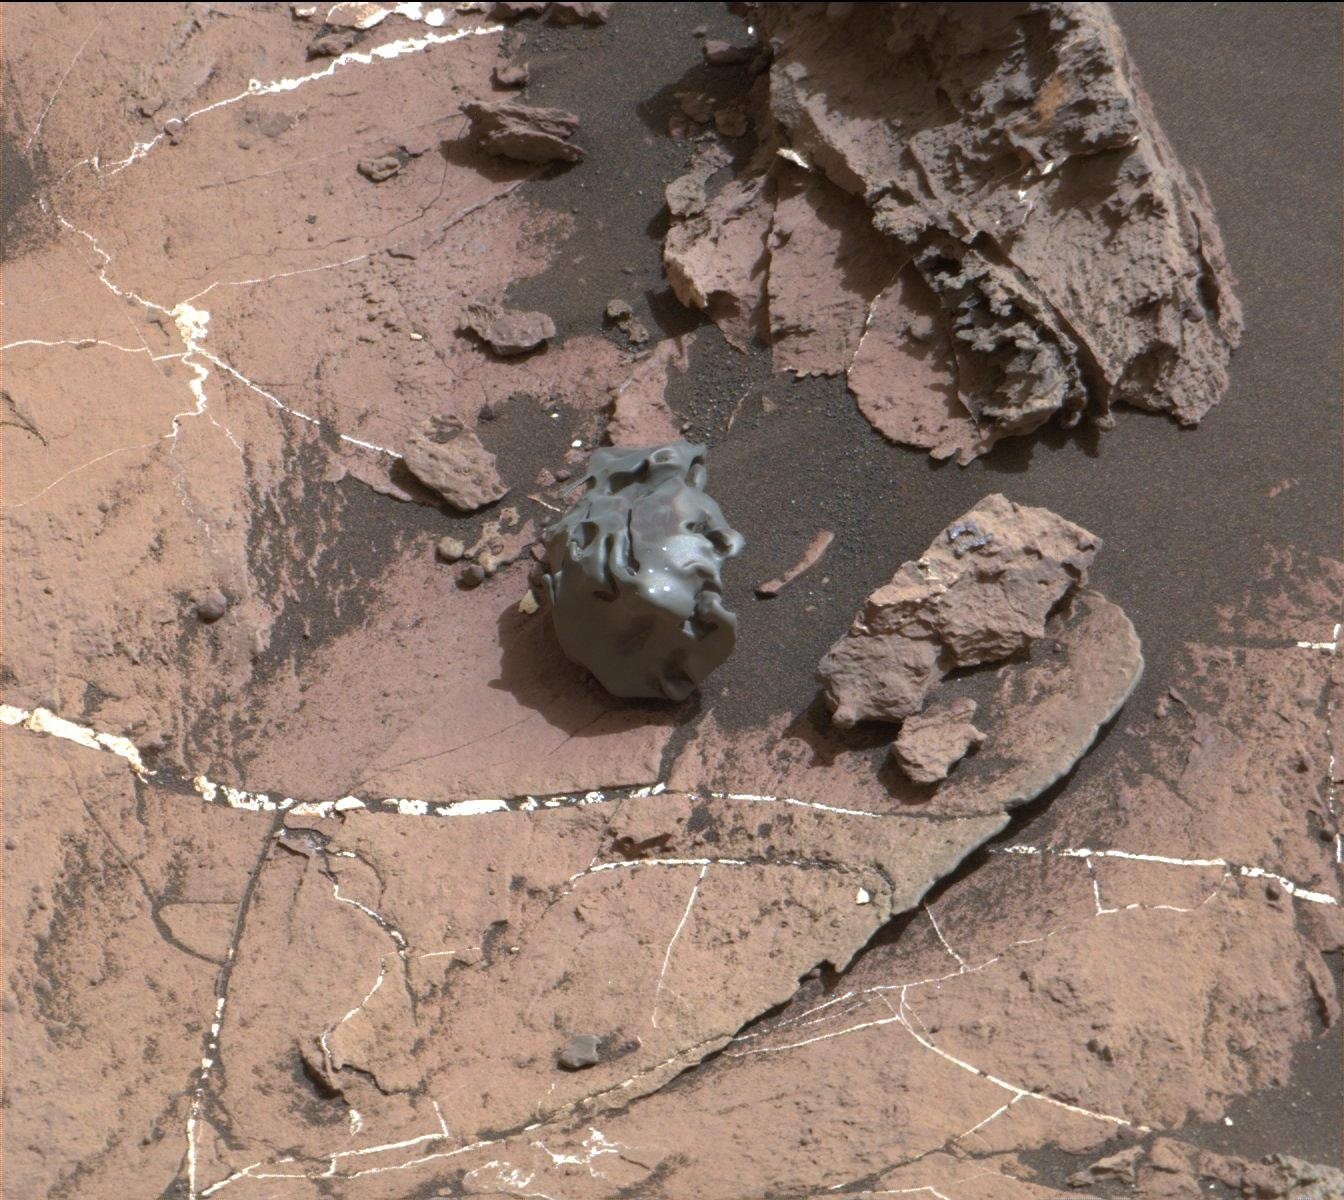 A weird rock that really stands out on the Martian ground